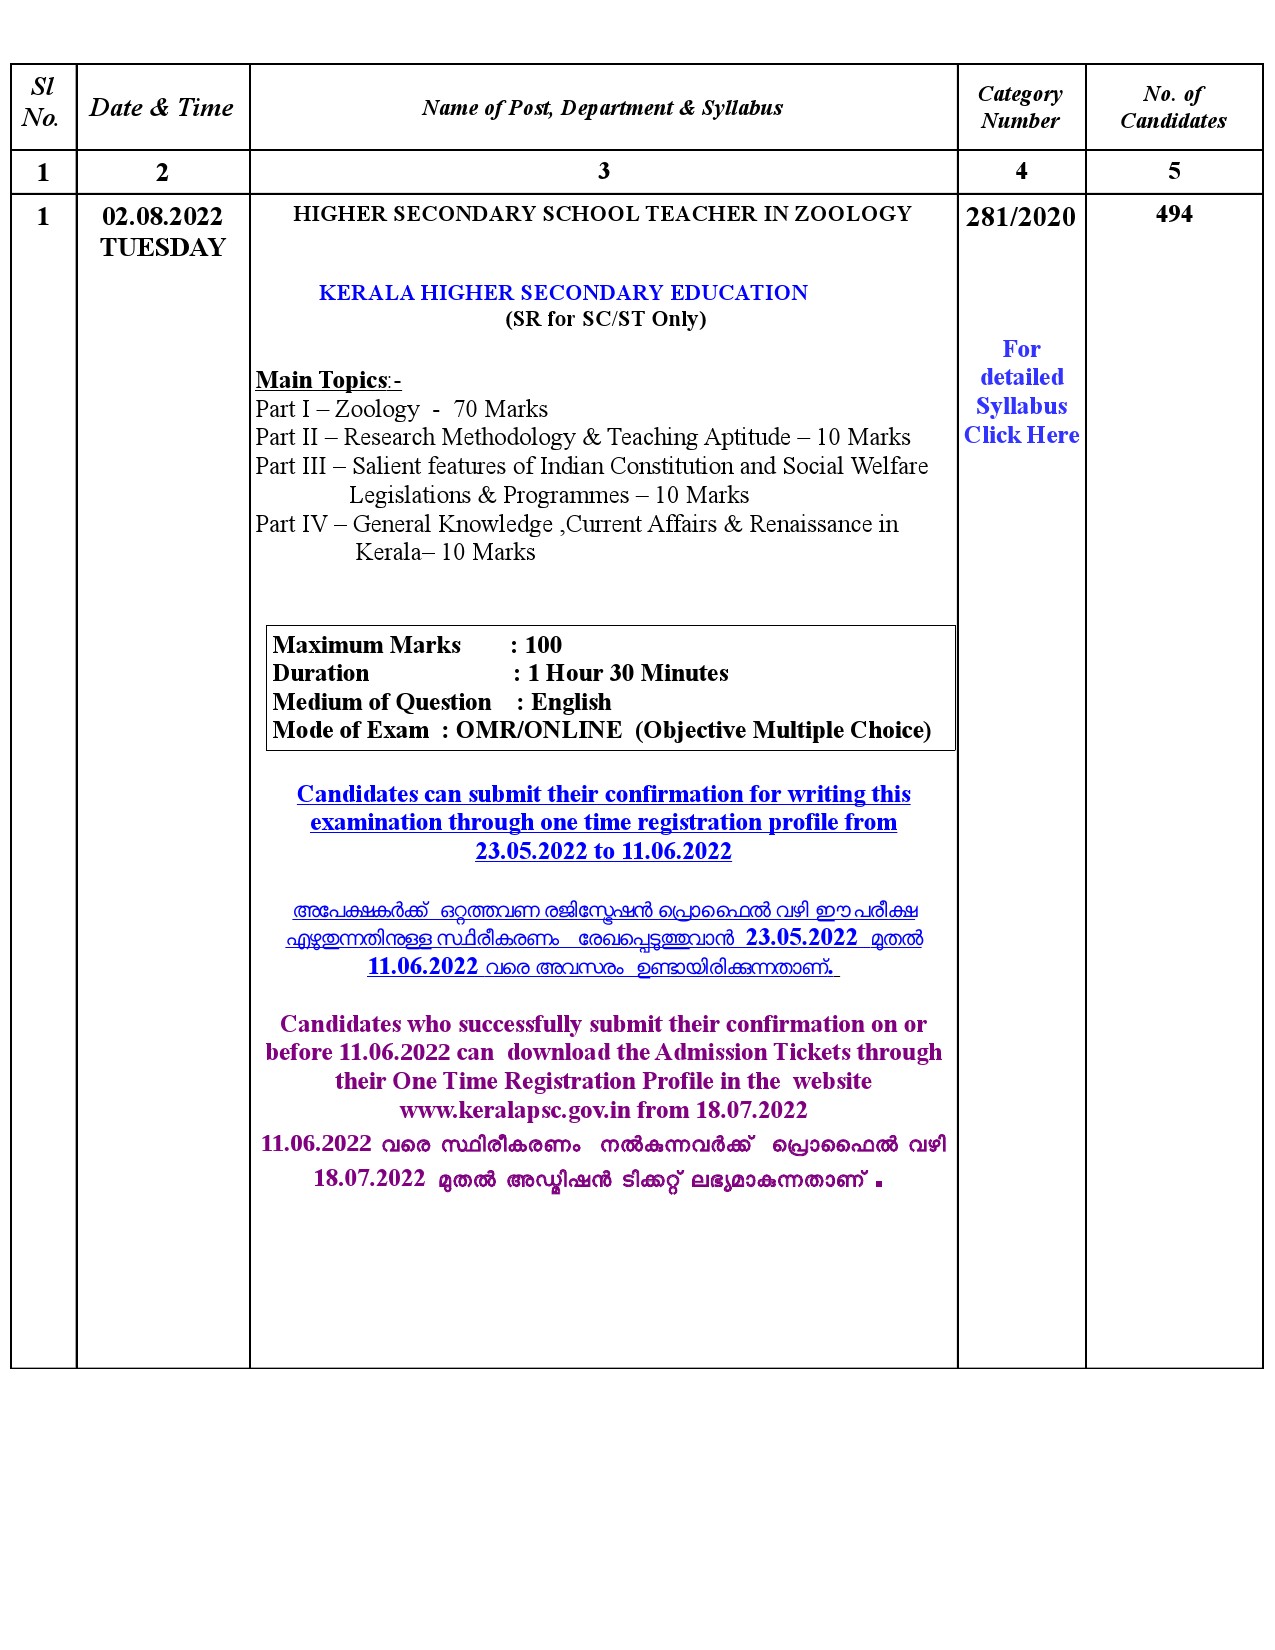 KPSC EXAMINATION PROGRAMME FOR THE MONTH OF AUGUST 2022 - Notification Image 2